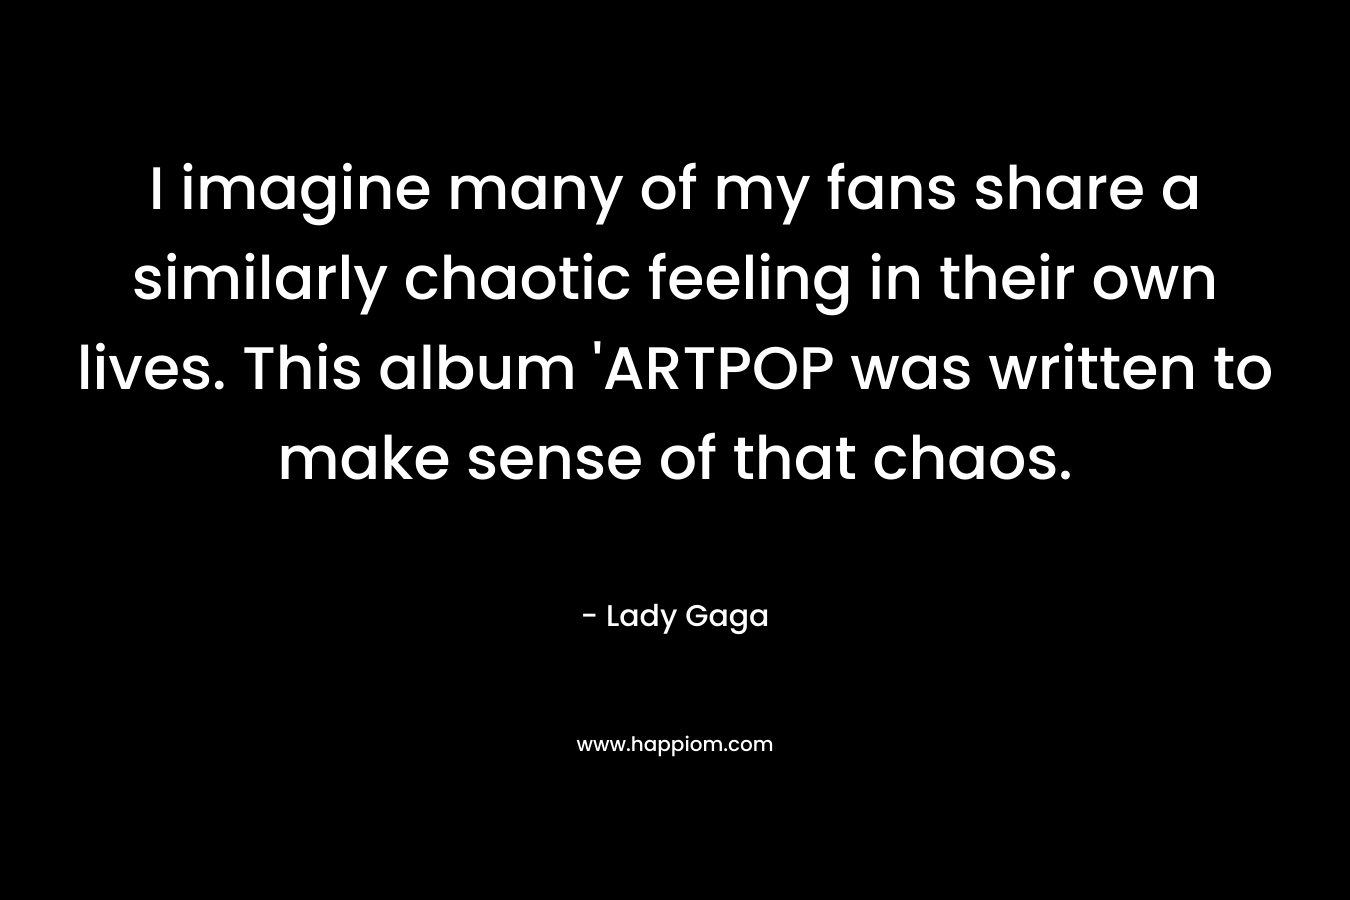 I imagine many of my fans share a similarly chaotic feeling in their own lives. This album 'ARTPOP was written to make sense of that chaos.